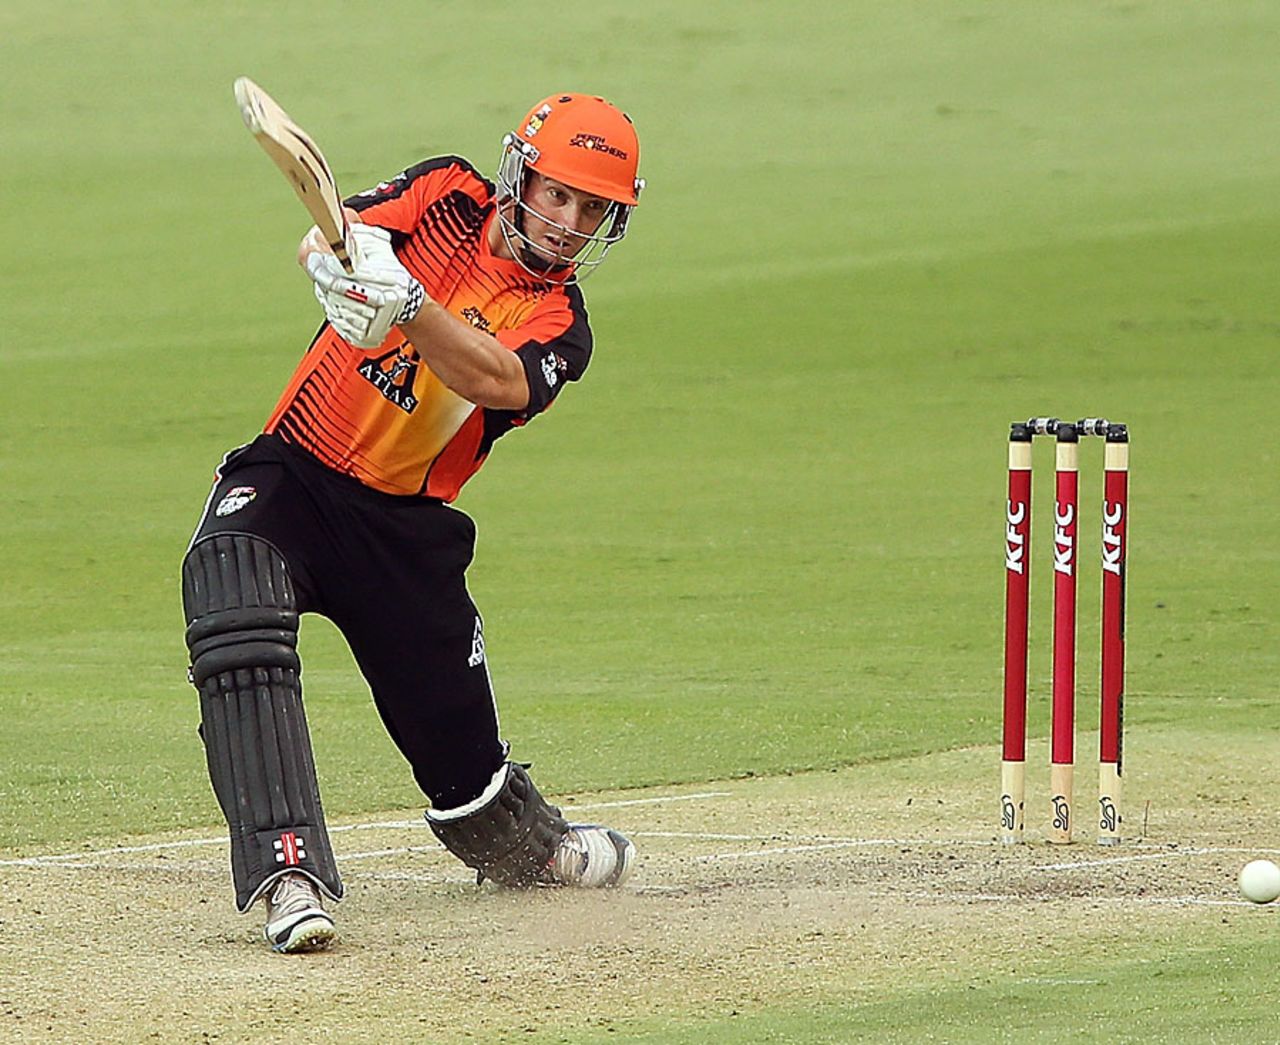 Shaun Marsh's 79 led Perth Scorchers to the semi-finals, Adelaide Strikers v Perth Scorchers, Big Bash League 2012-13, Adelaide, January 10, 2013